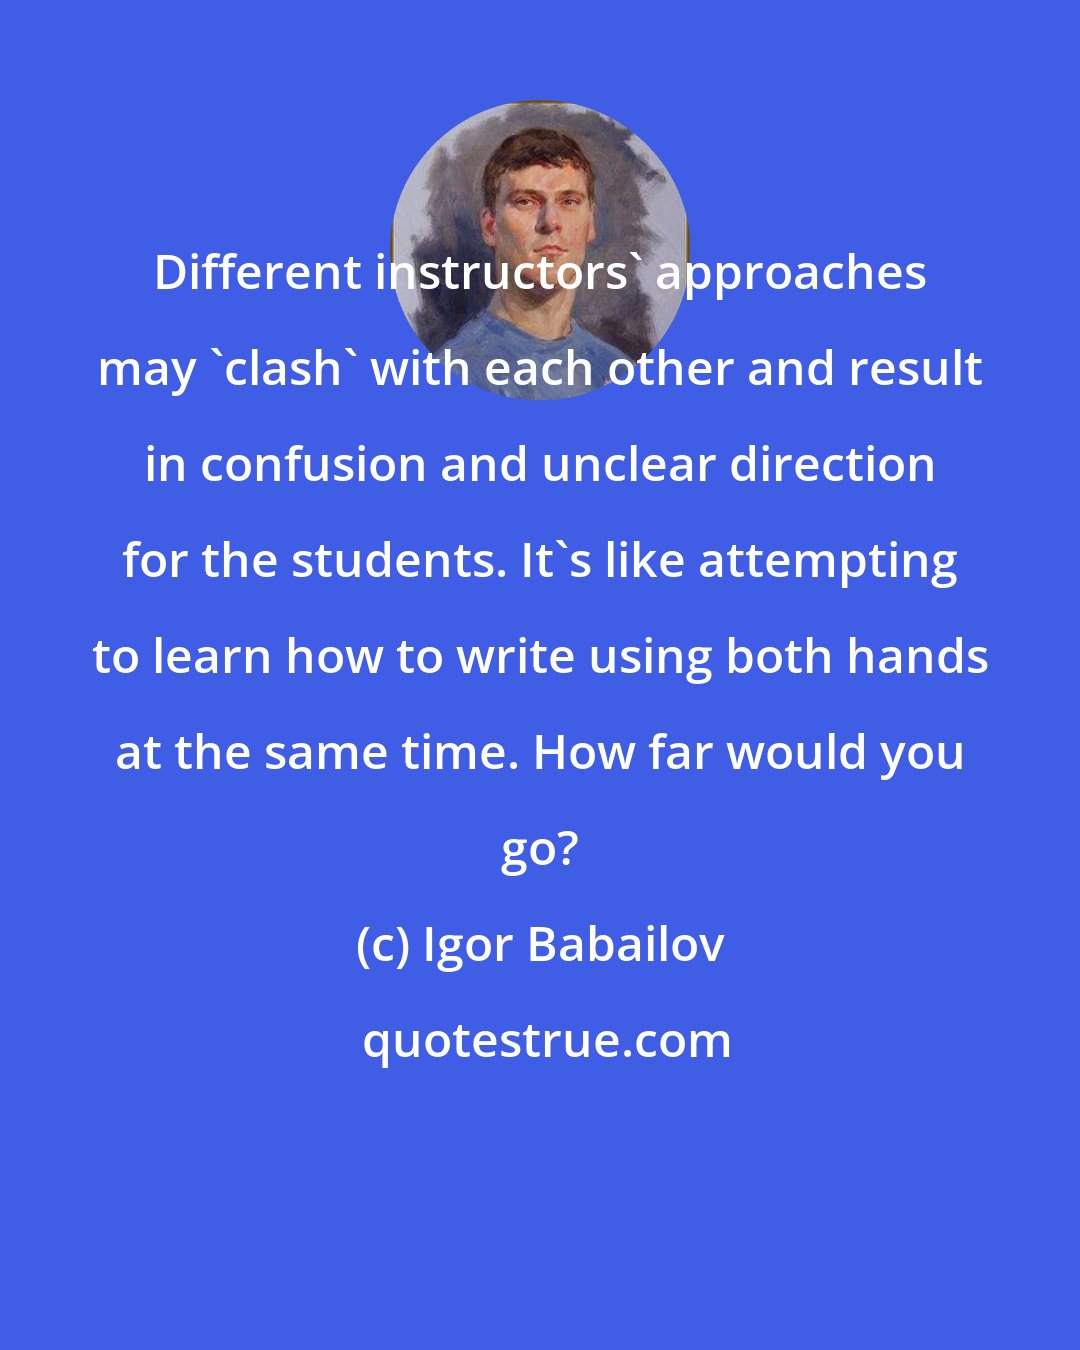 Igor Babailov: Different instructors' approaches may 'clash' with each other and result in confusion and unclear direction for the students. It's like attempting to learn how to write using both hands at the same time. How far would you go?